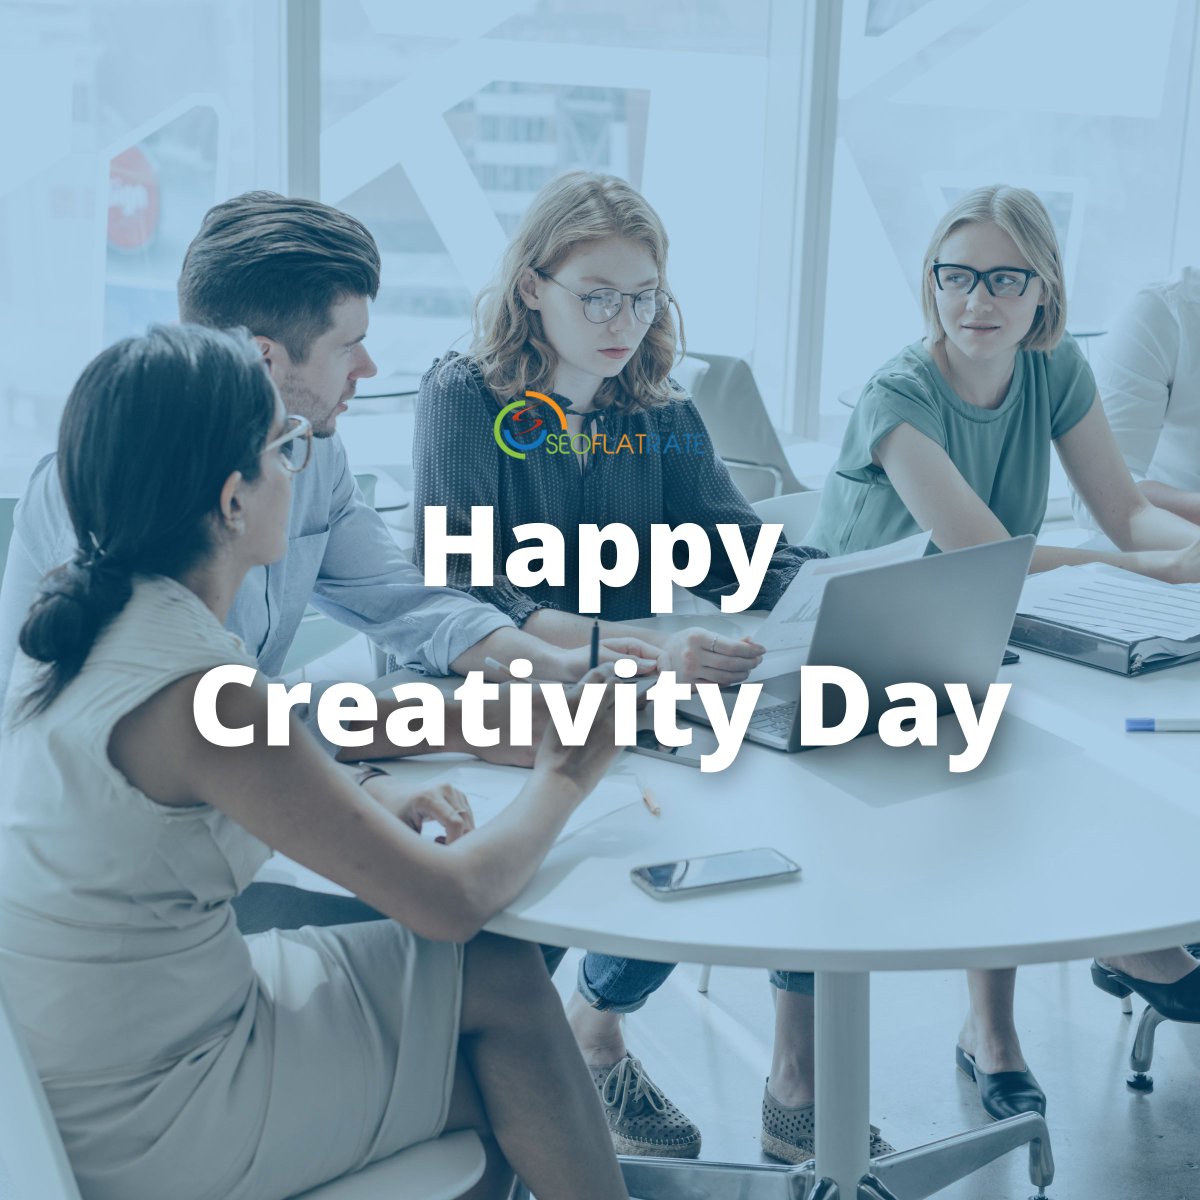 🎨 Happy Creativity Day!

At SEO Flatrate, we believe that creativity is the key to unlocking endless possibilities for your brand. Contact us on 01202 911141 to find out more about our range of social media services.

#CreativityDay #SocialMediaManagement #UnlockYourPotential